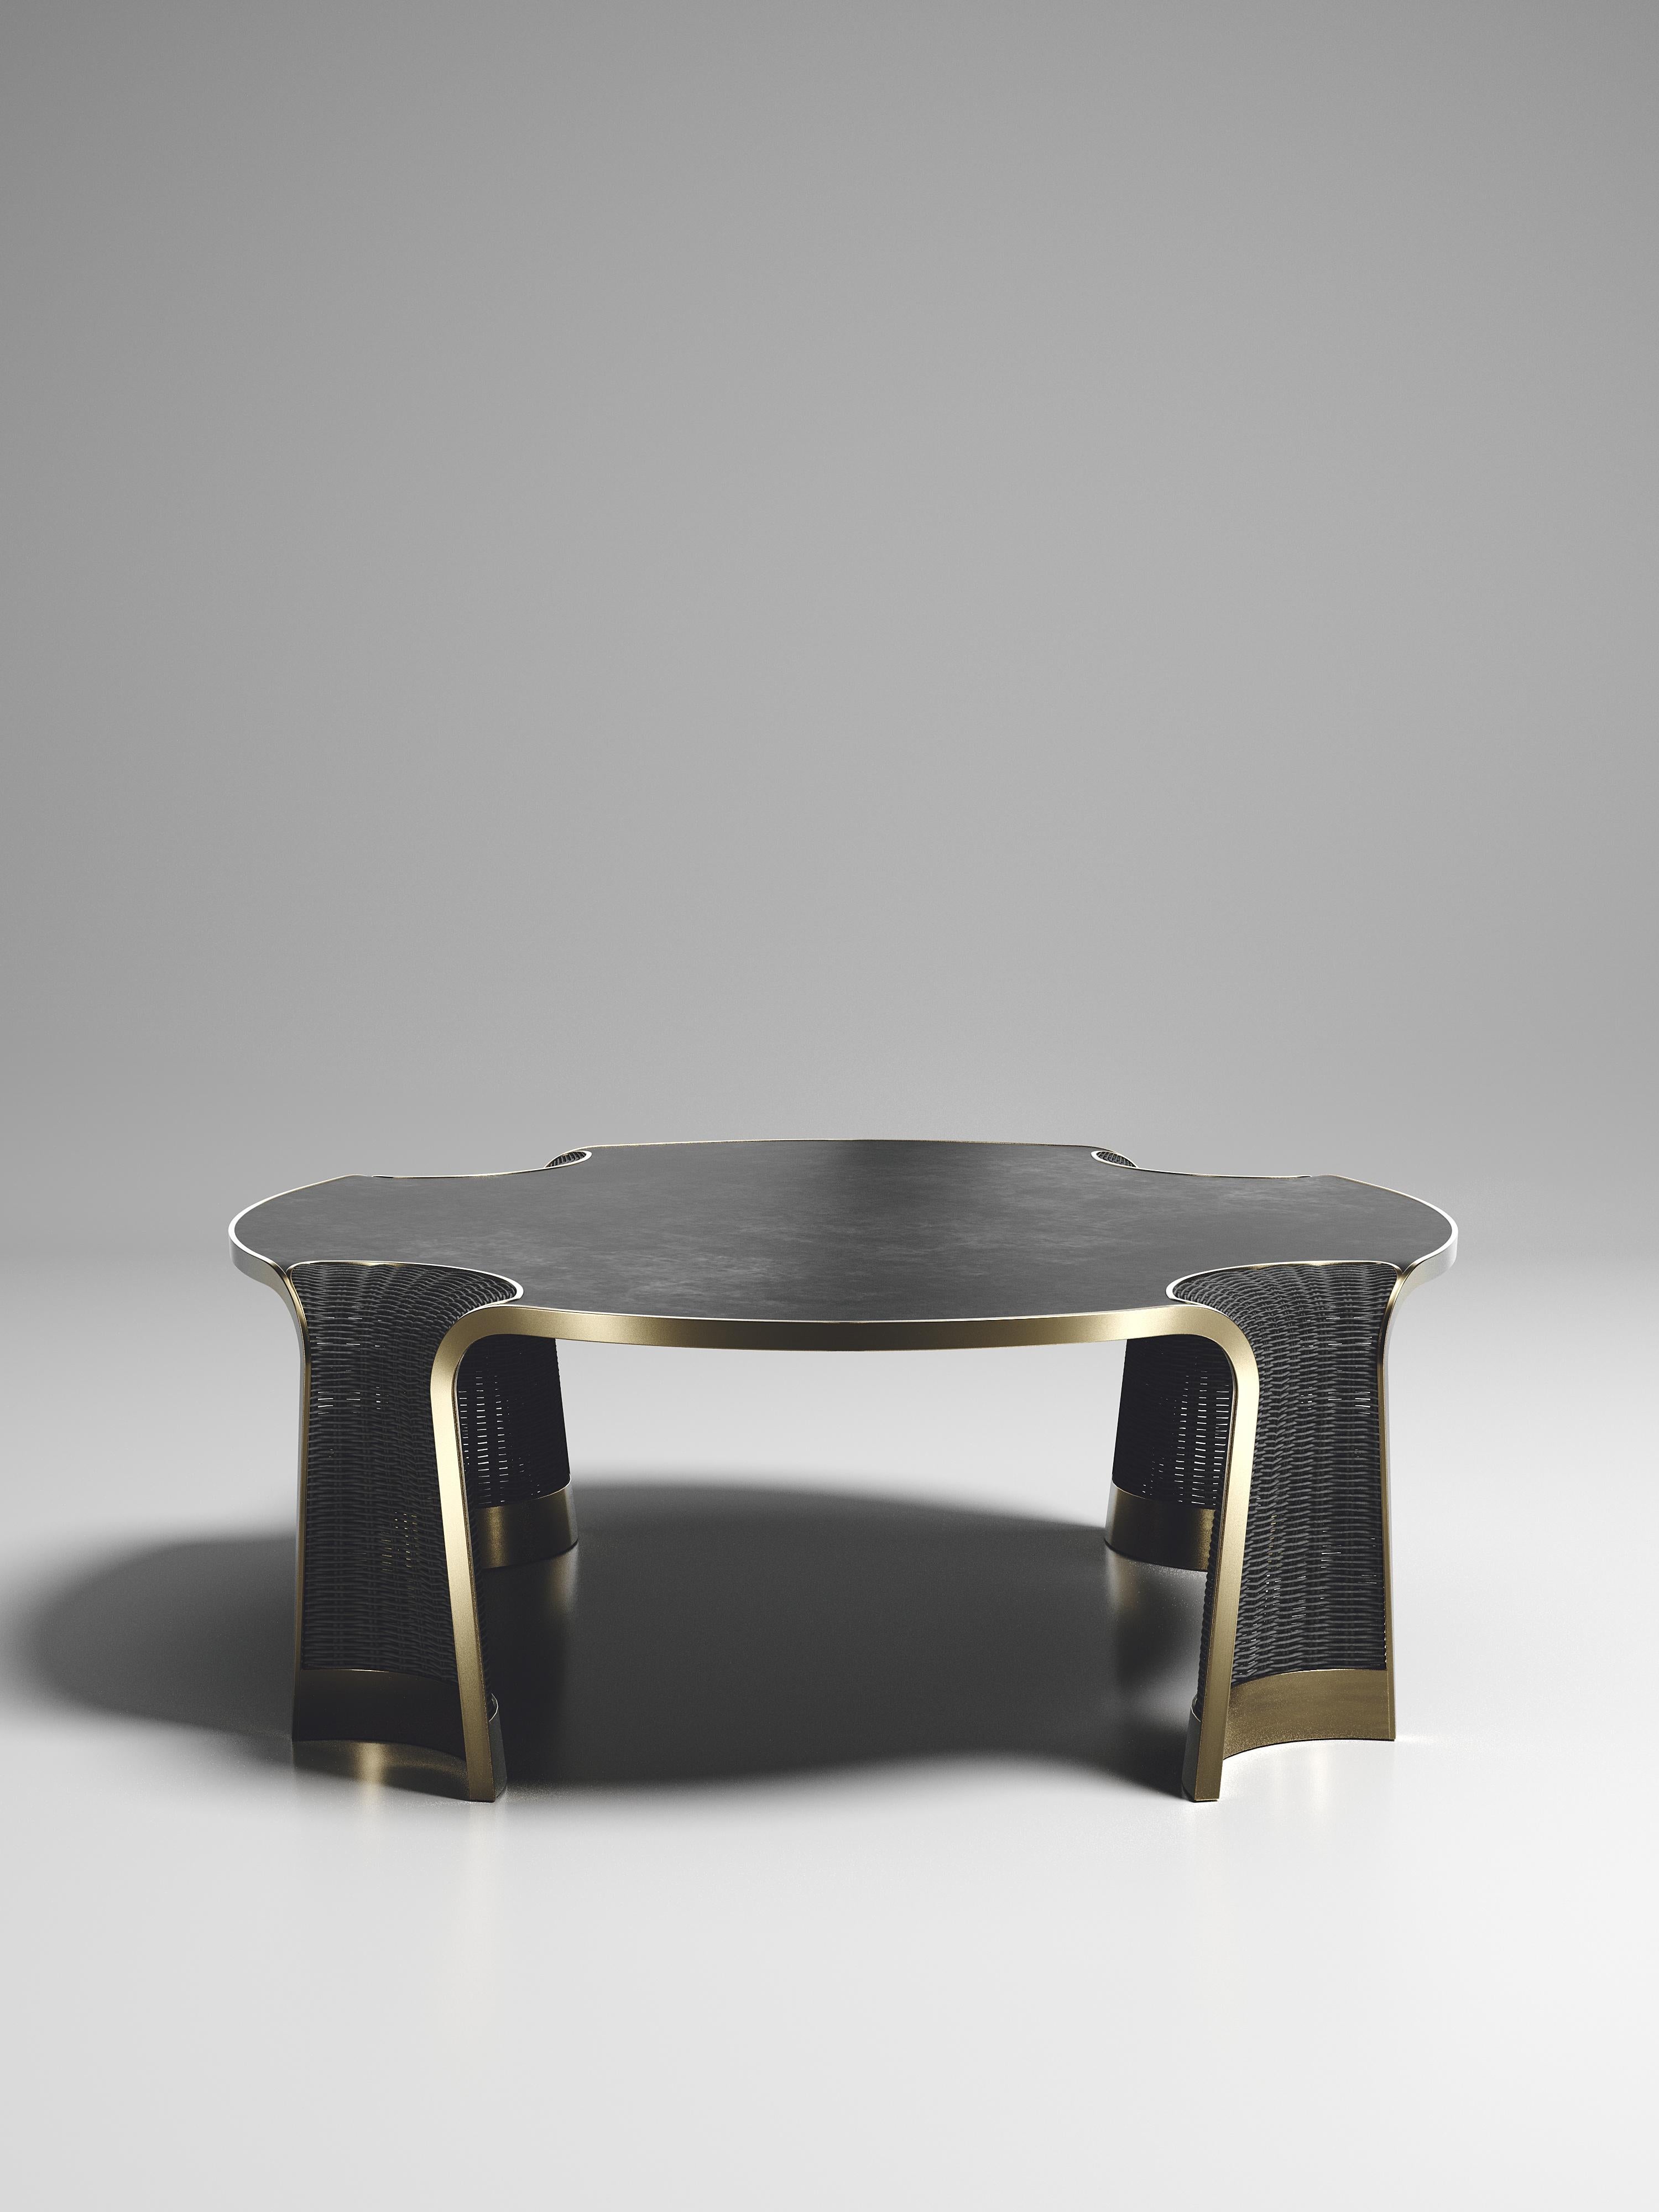 The Nymphea round coffee by R & Y Augousti is a part of their new Rattan capsule launch. The piece explores the brand's iconic DNA of bringing old world artisanal craft into a contemporary and utterly luxury feel. This table is done in a black